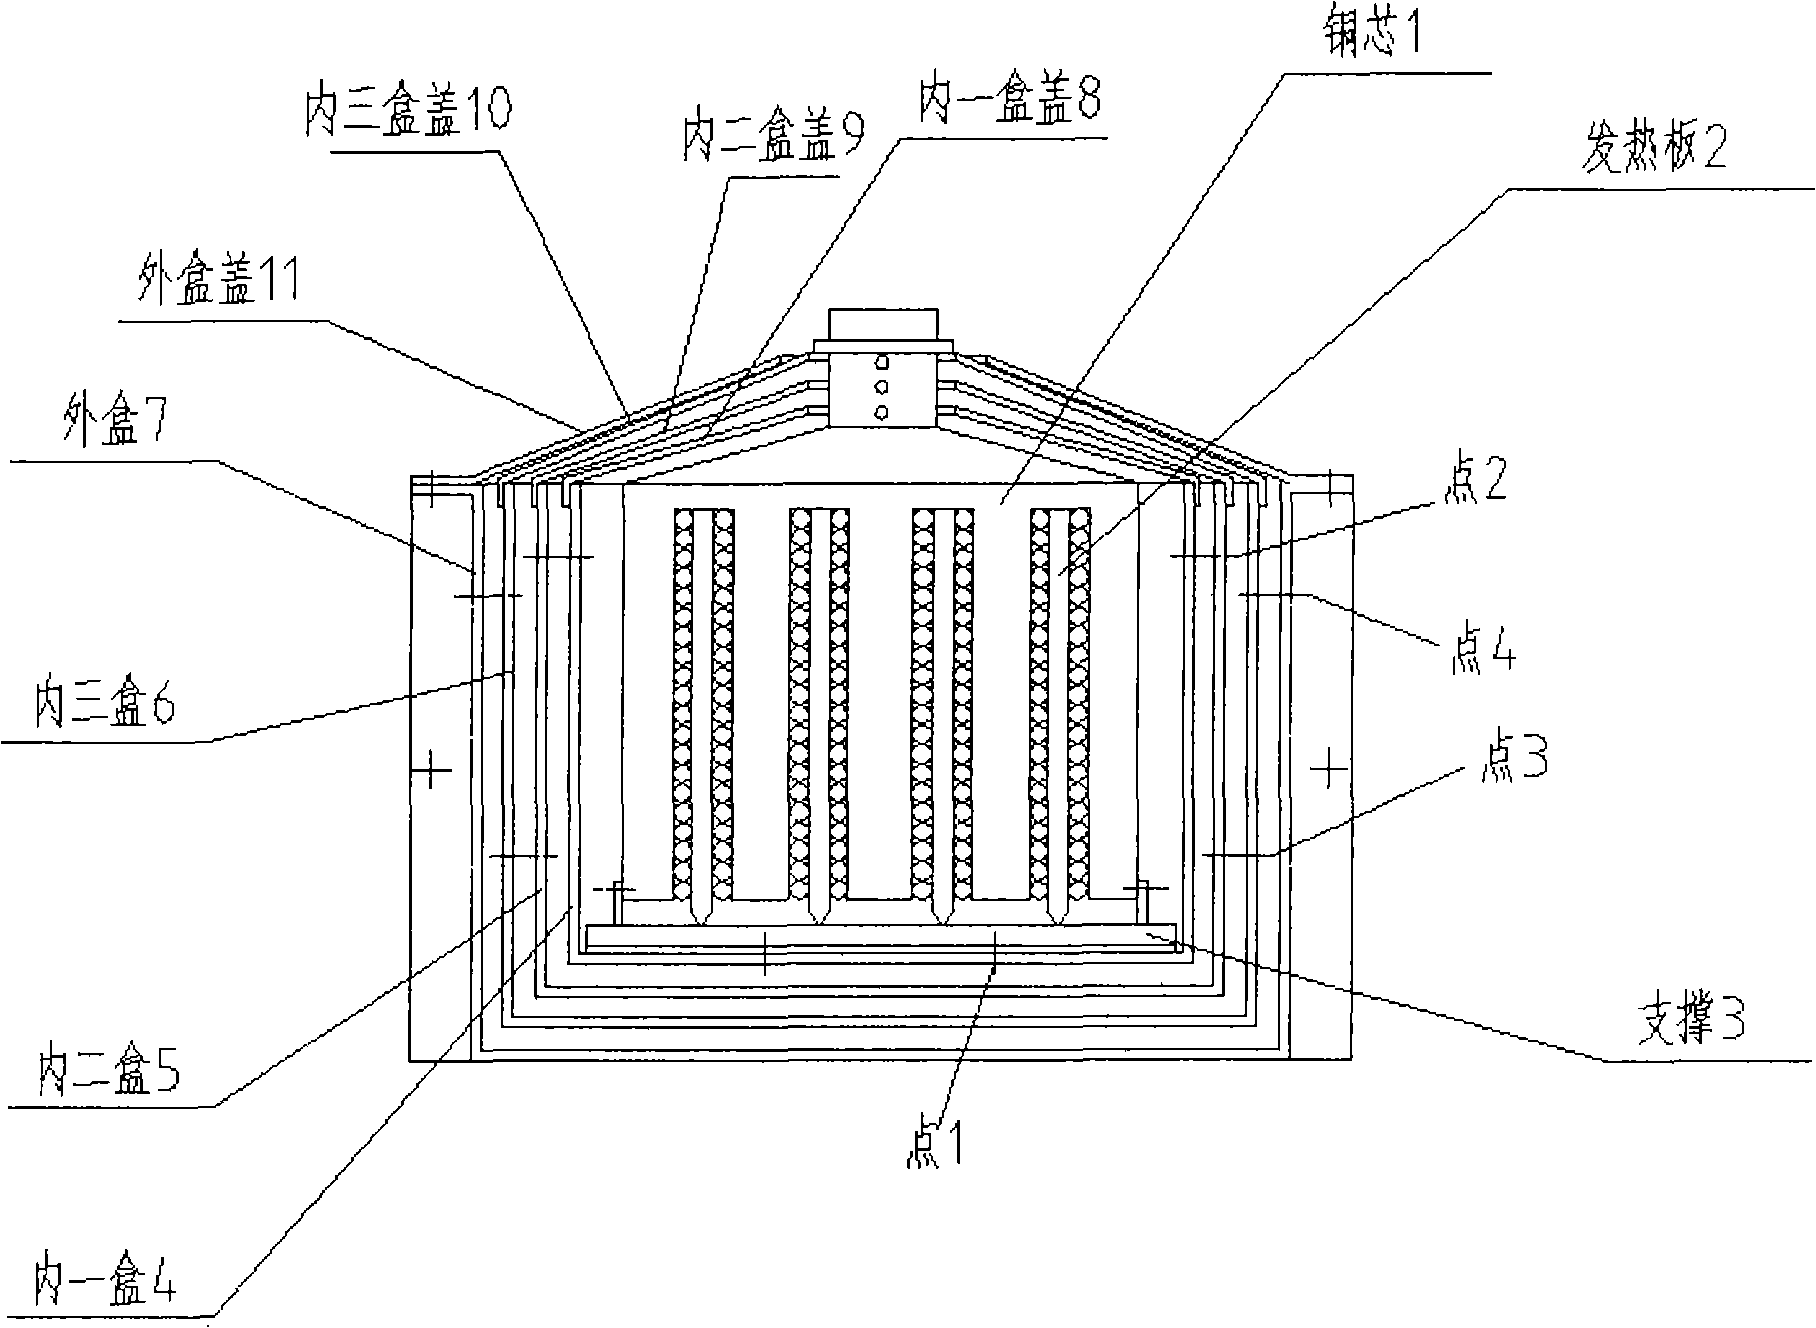 Heat flow heater with wall insulating property